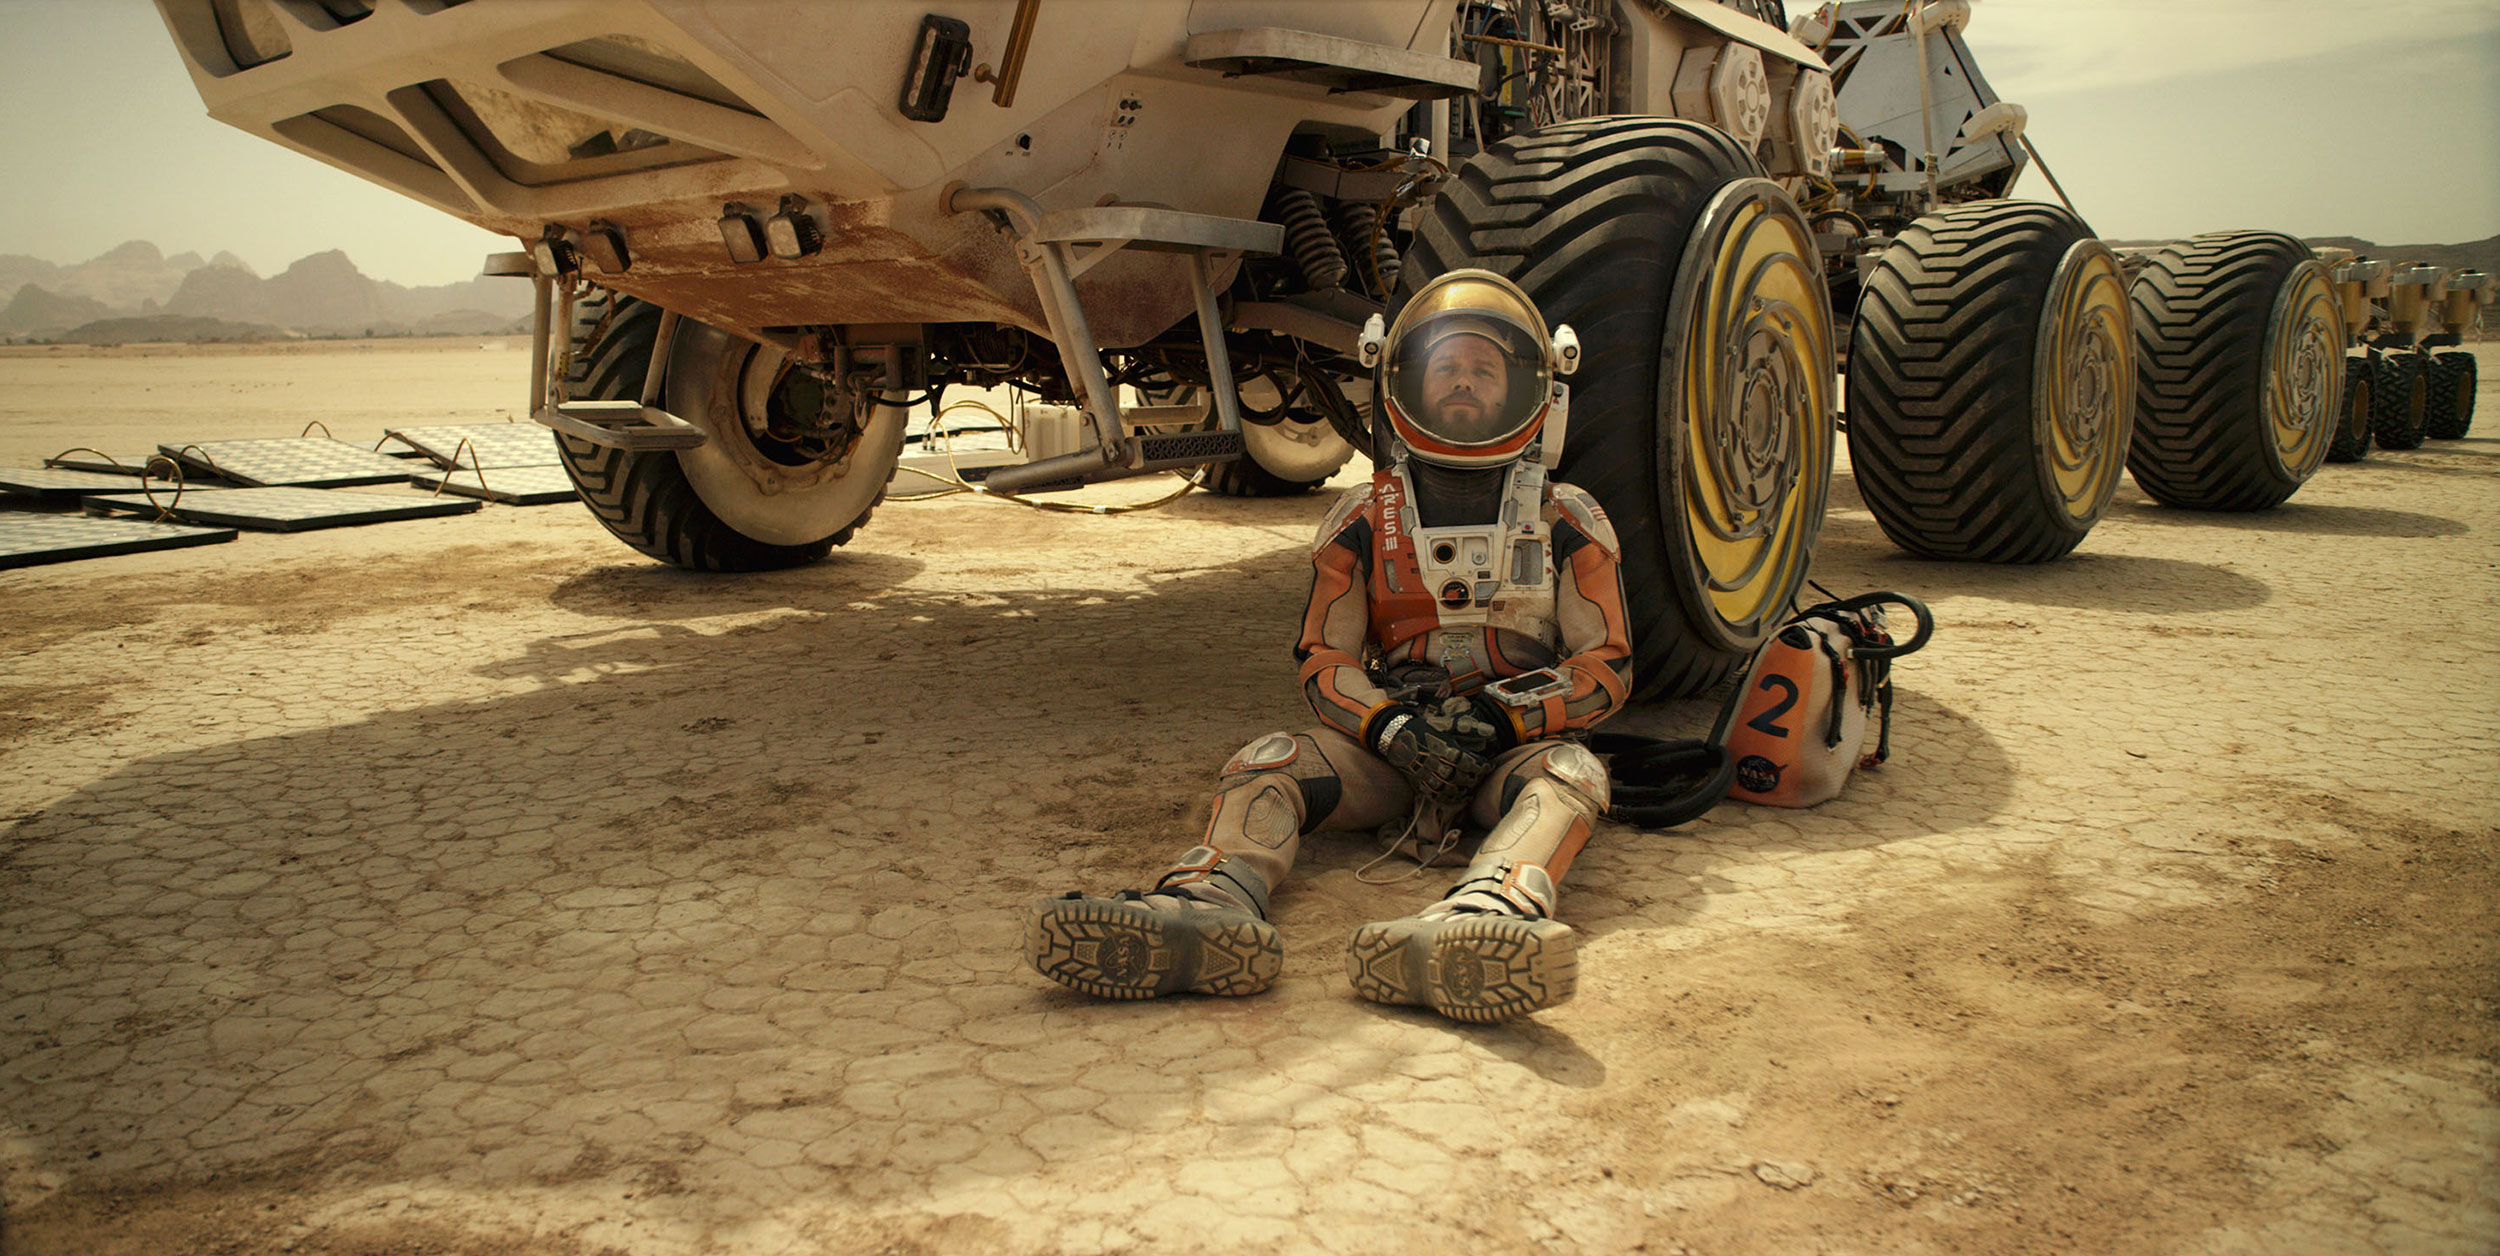 Astronaut Mark Watney faces seemingly insurmountable odds as he tries to subsist on Mars and find a way back home to Earth. Credit: Twentieth Century Fox Film Corporation